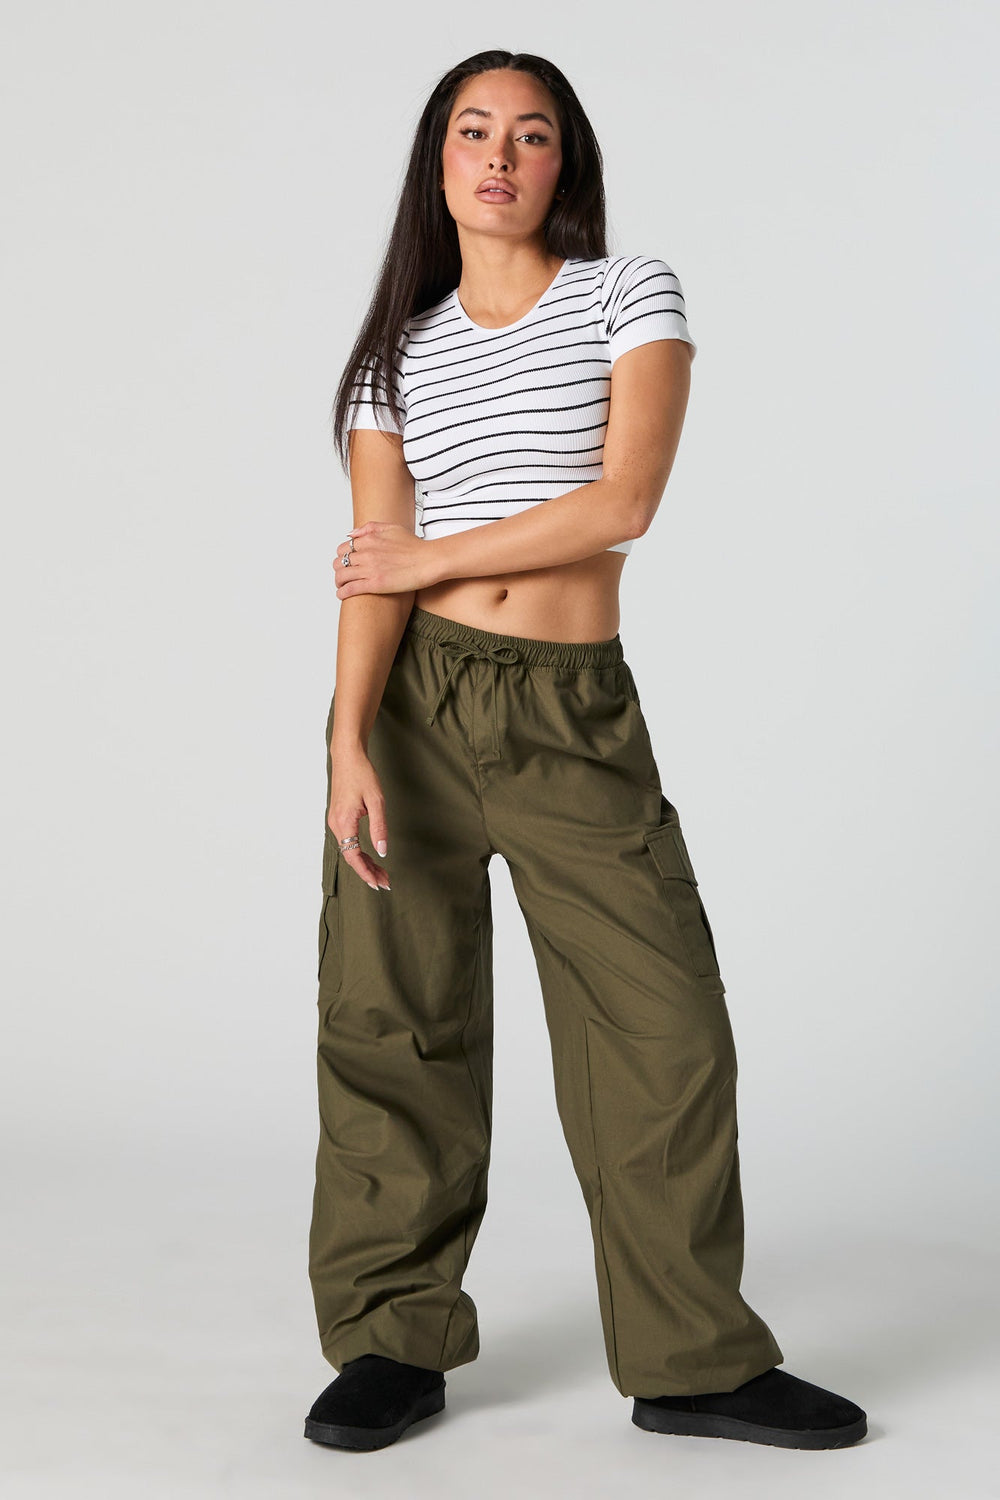 Striped Ribbed Short Sleeve Crop Top Striped Ribbed Short Sleeve Crop Top 3